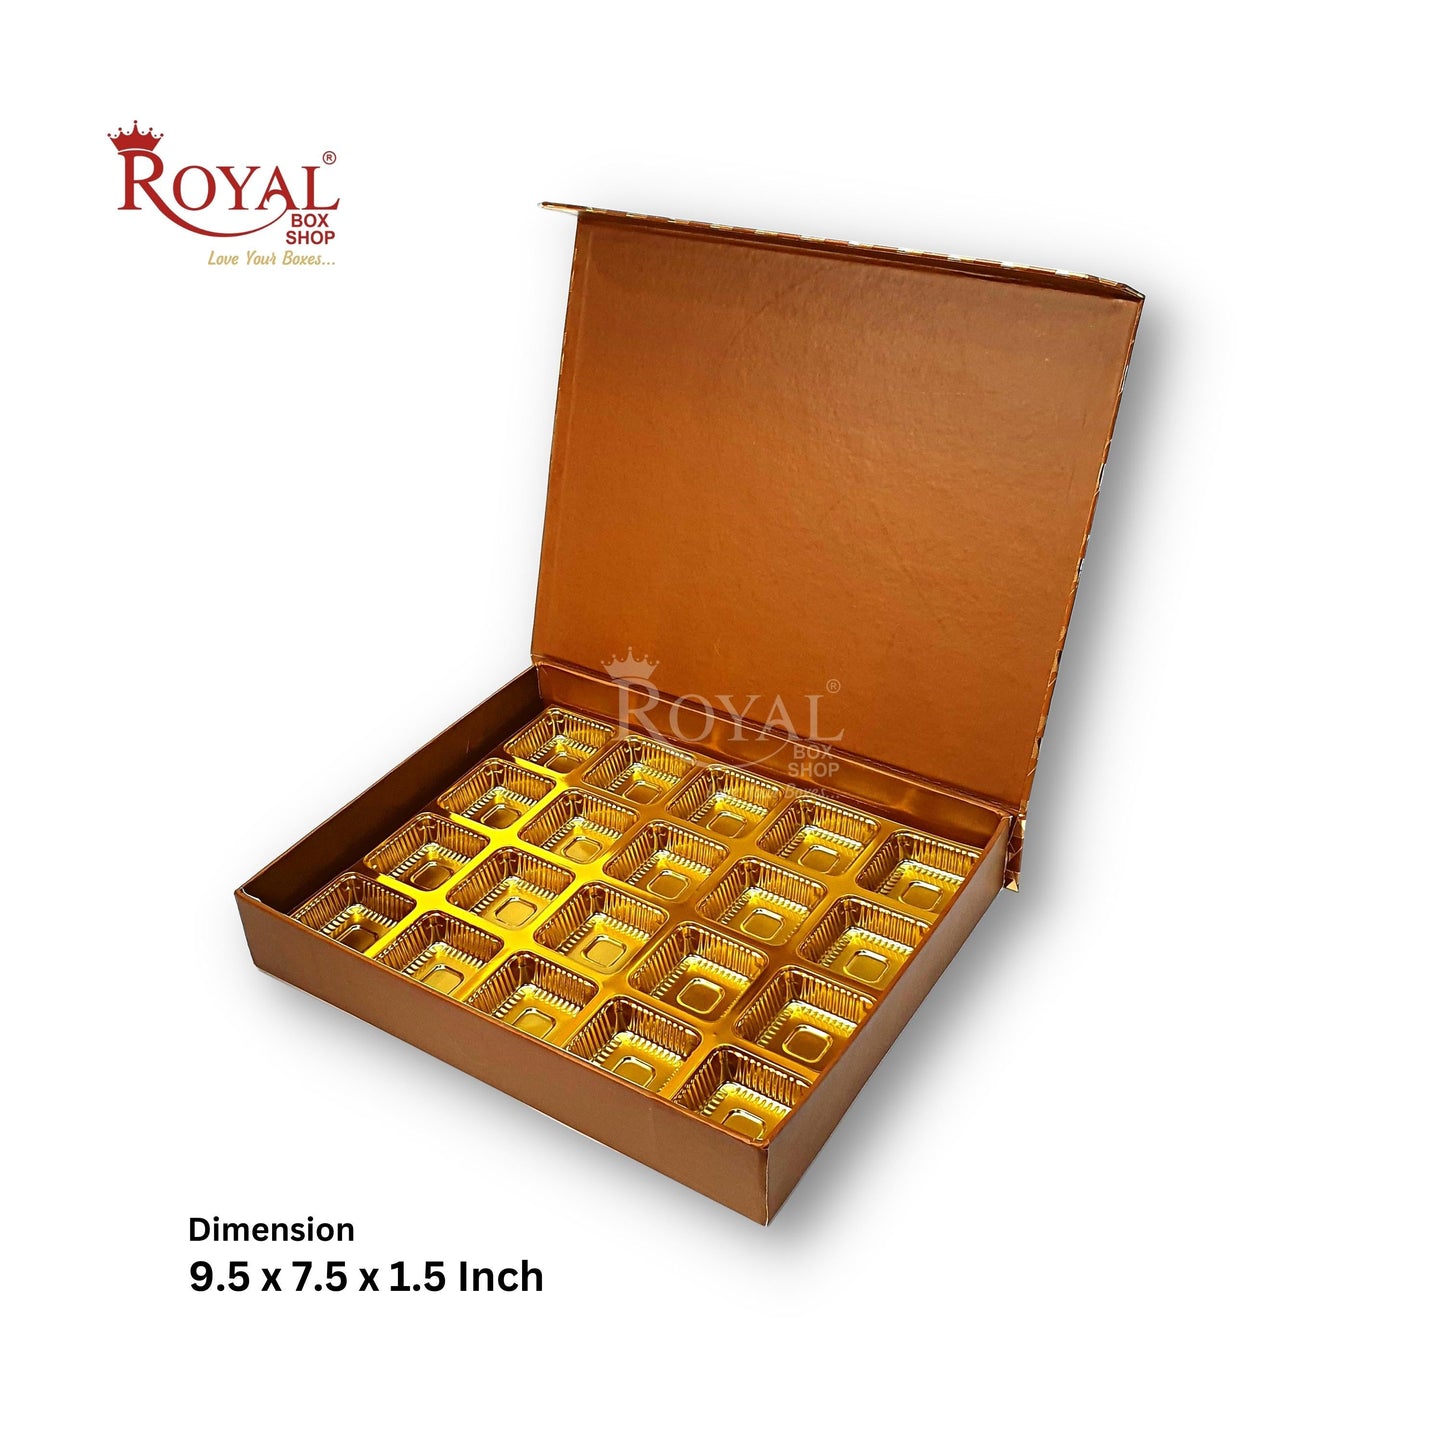 Rigid Chocolate Boxes 20 Cavity With Magnetic Flap I Brown with Gold Foiling I 9.5 X 7.5 X 1.5 Inch I Kappa Boxes Royal Box Shop